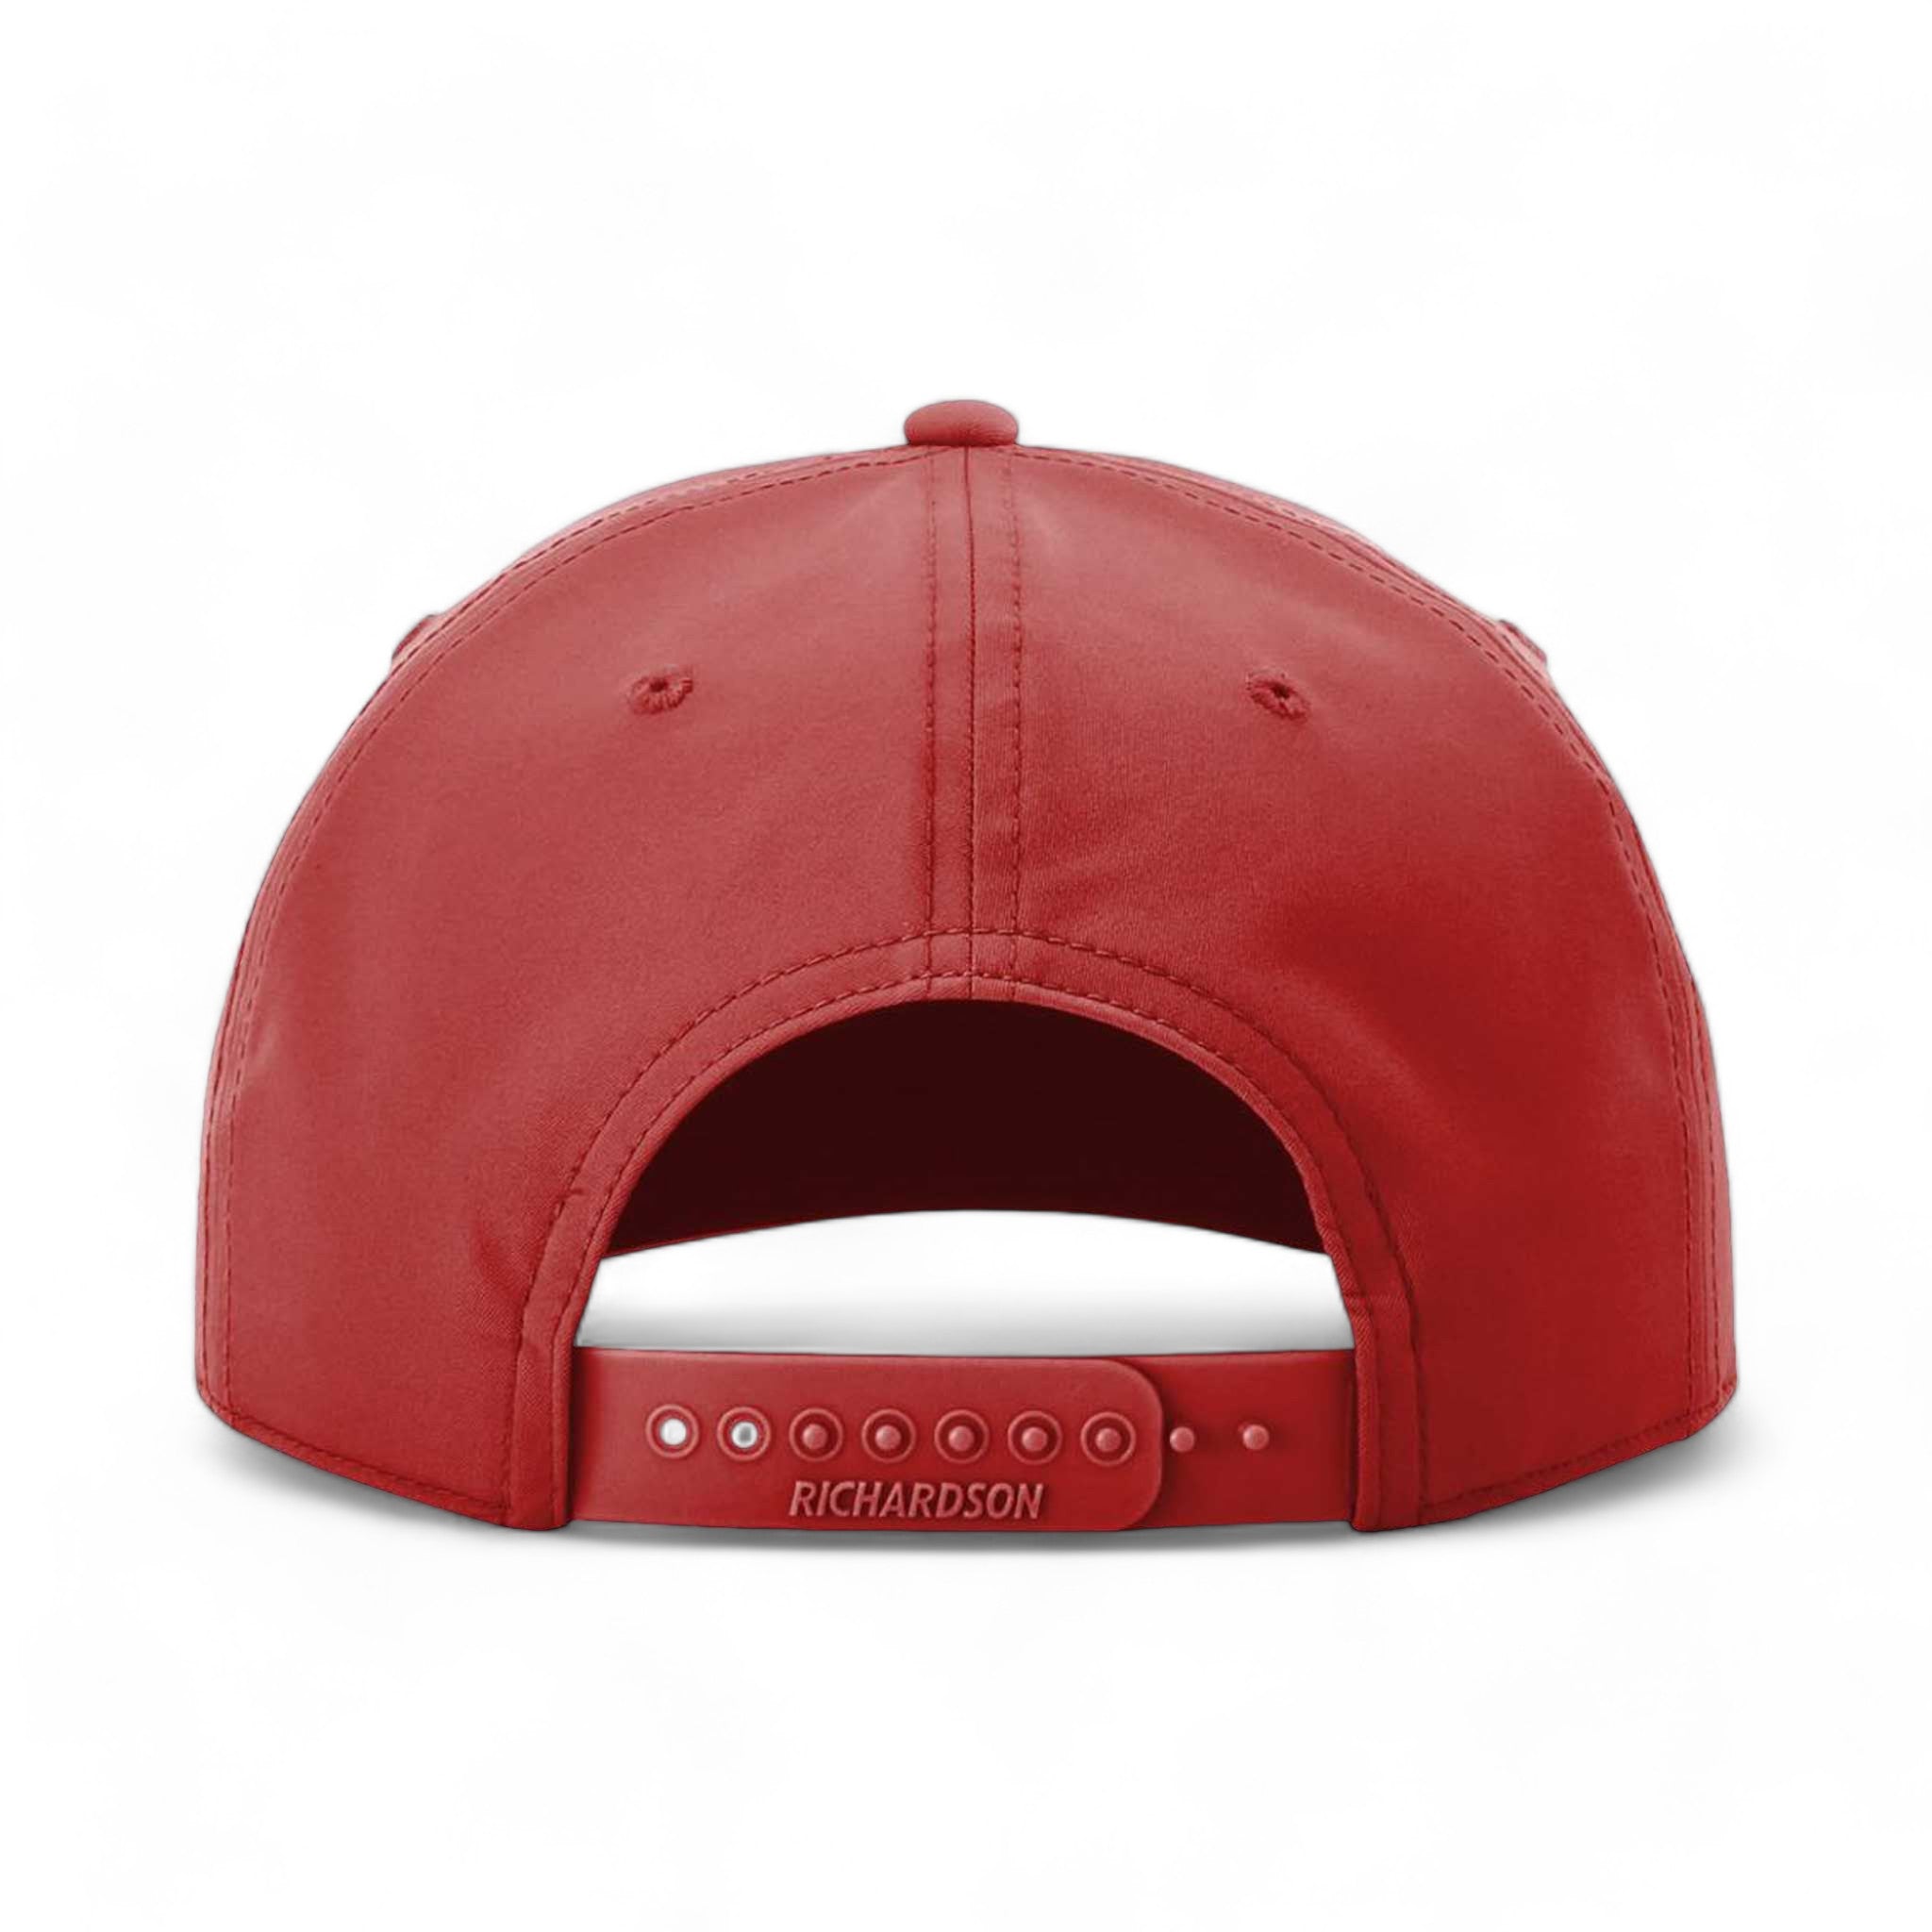 Back view of Richardson 258 custom hat in red and white